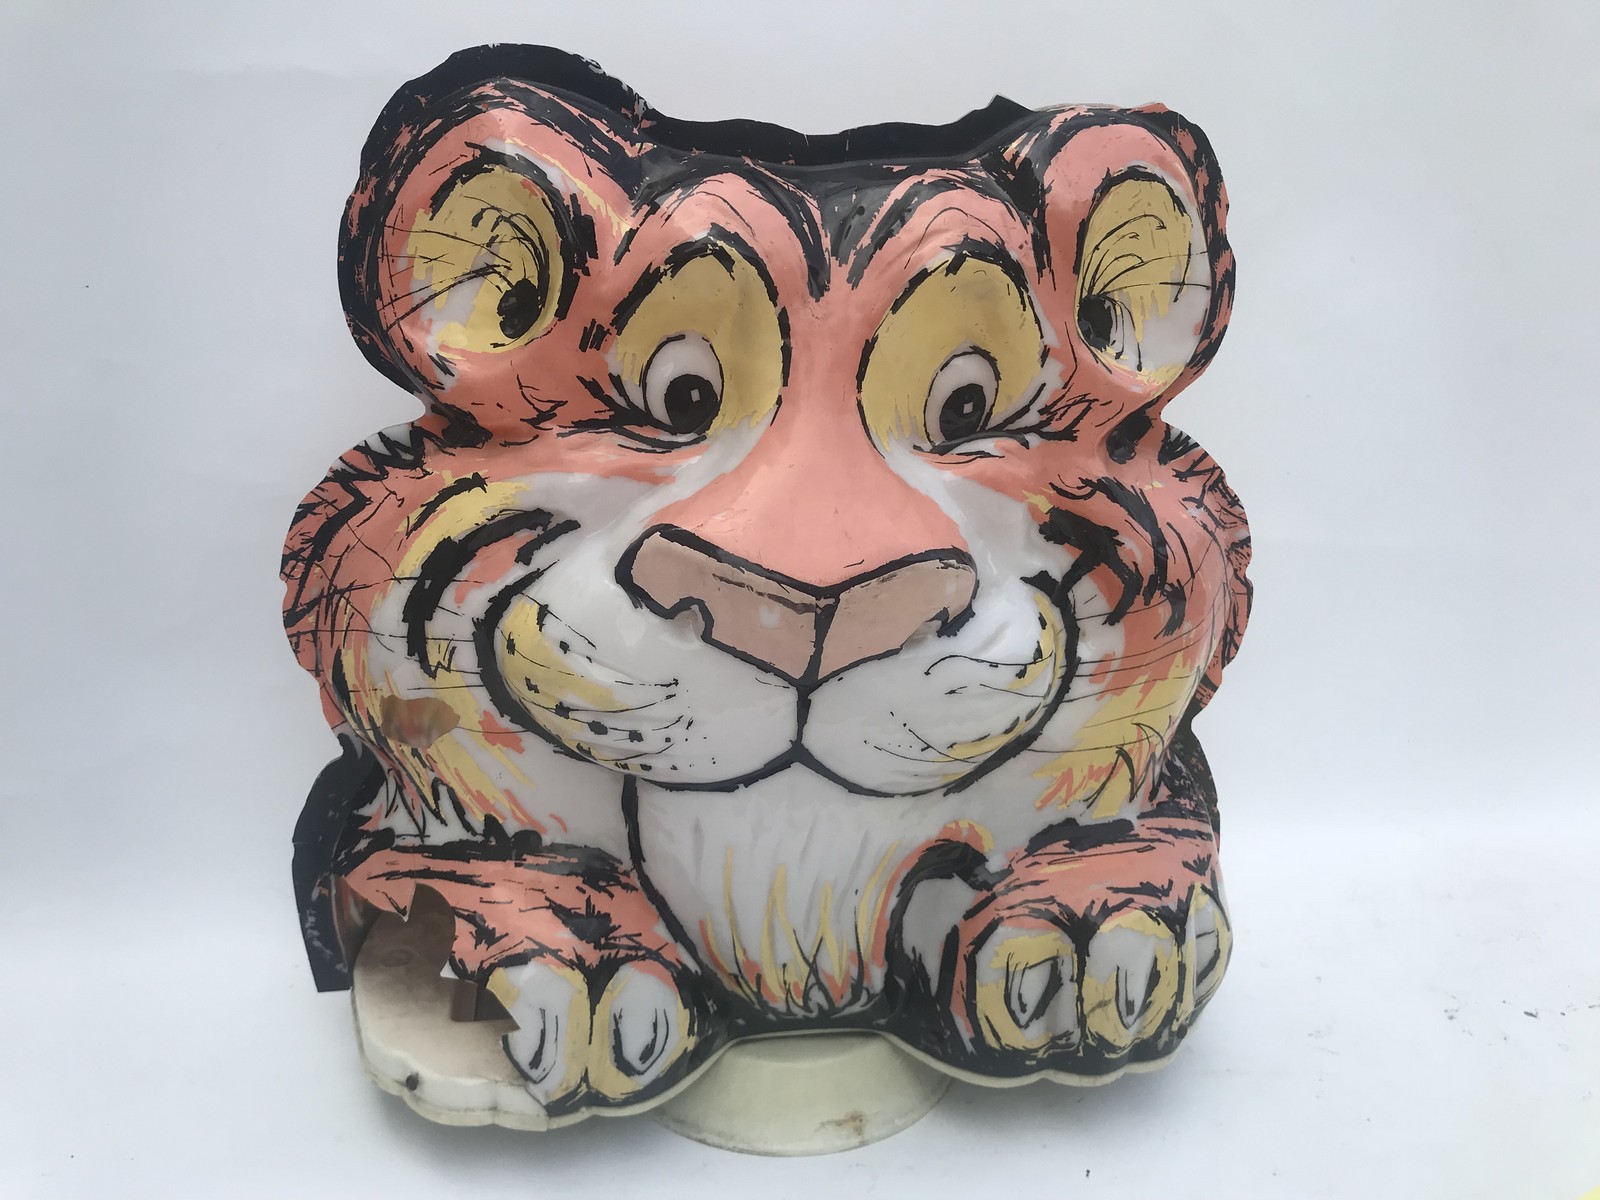 A rare Esso 'Put a tiger in the tank' plastic petrol pump globe, with some damage. - Image 2 of 3